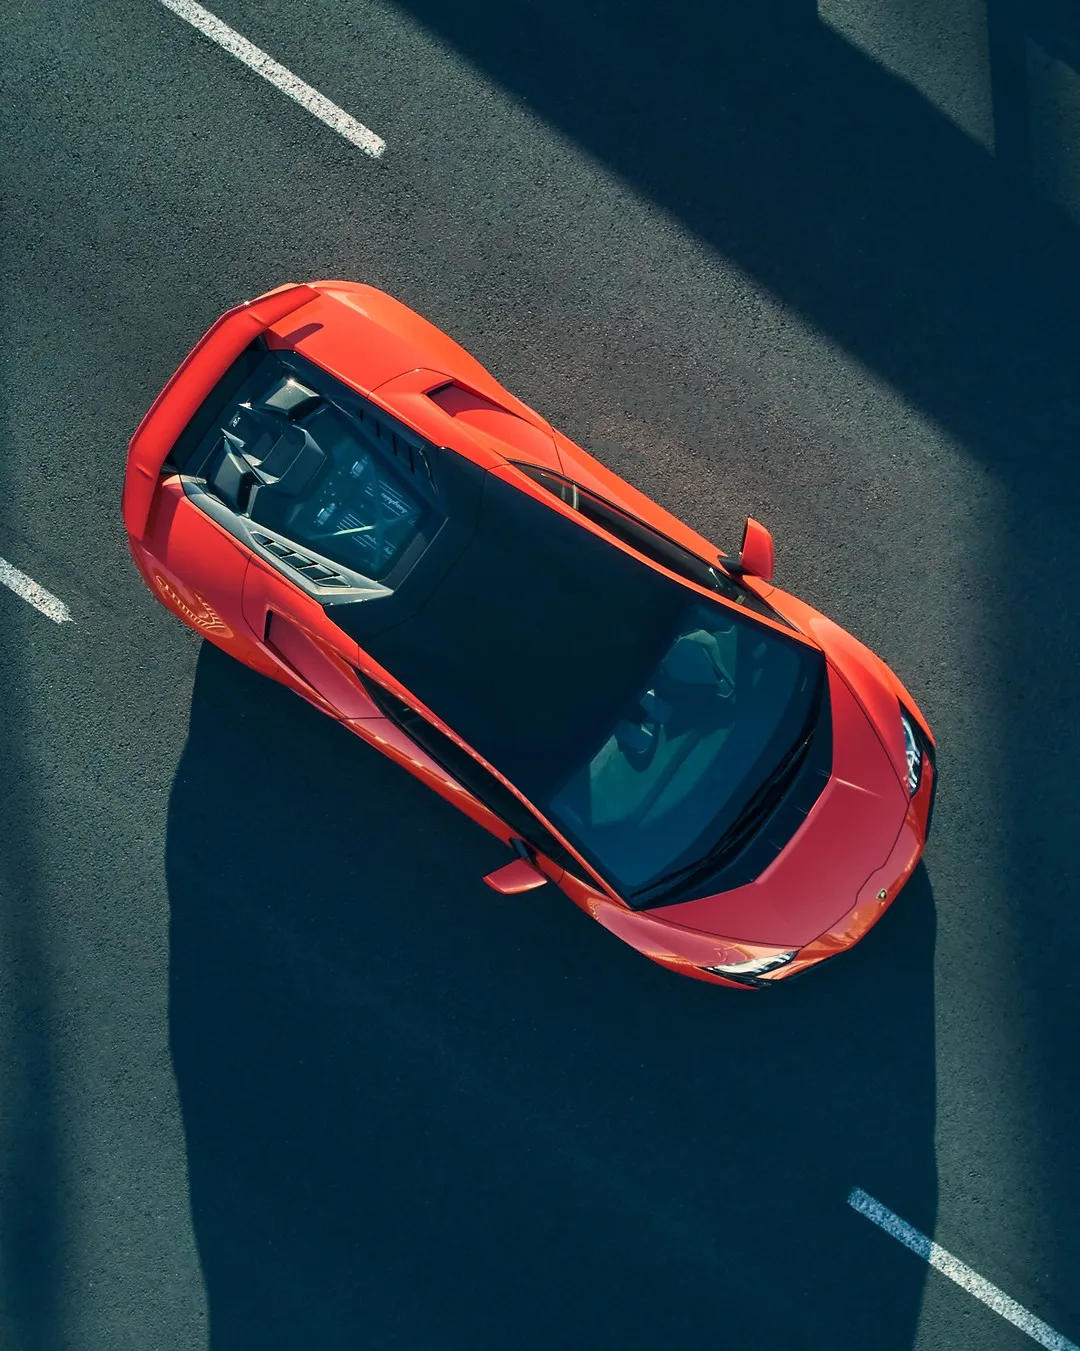 Lamborghini - A different viewpoint is exactly what we needed to prove that Huracán Tecnica is beautiful wherever you look at it